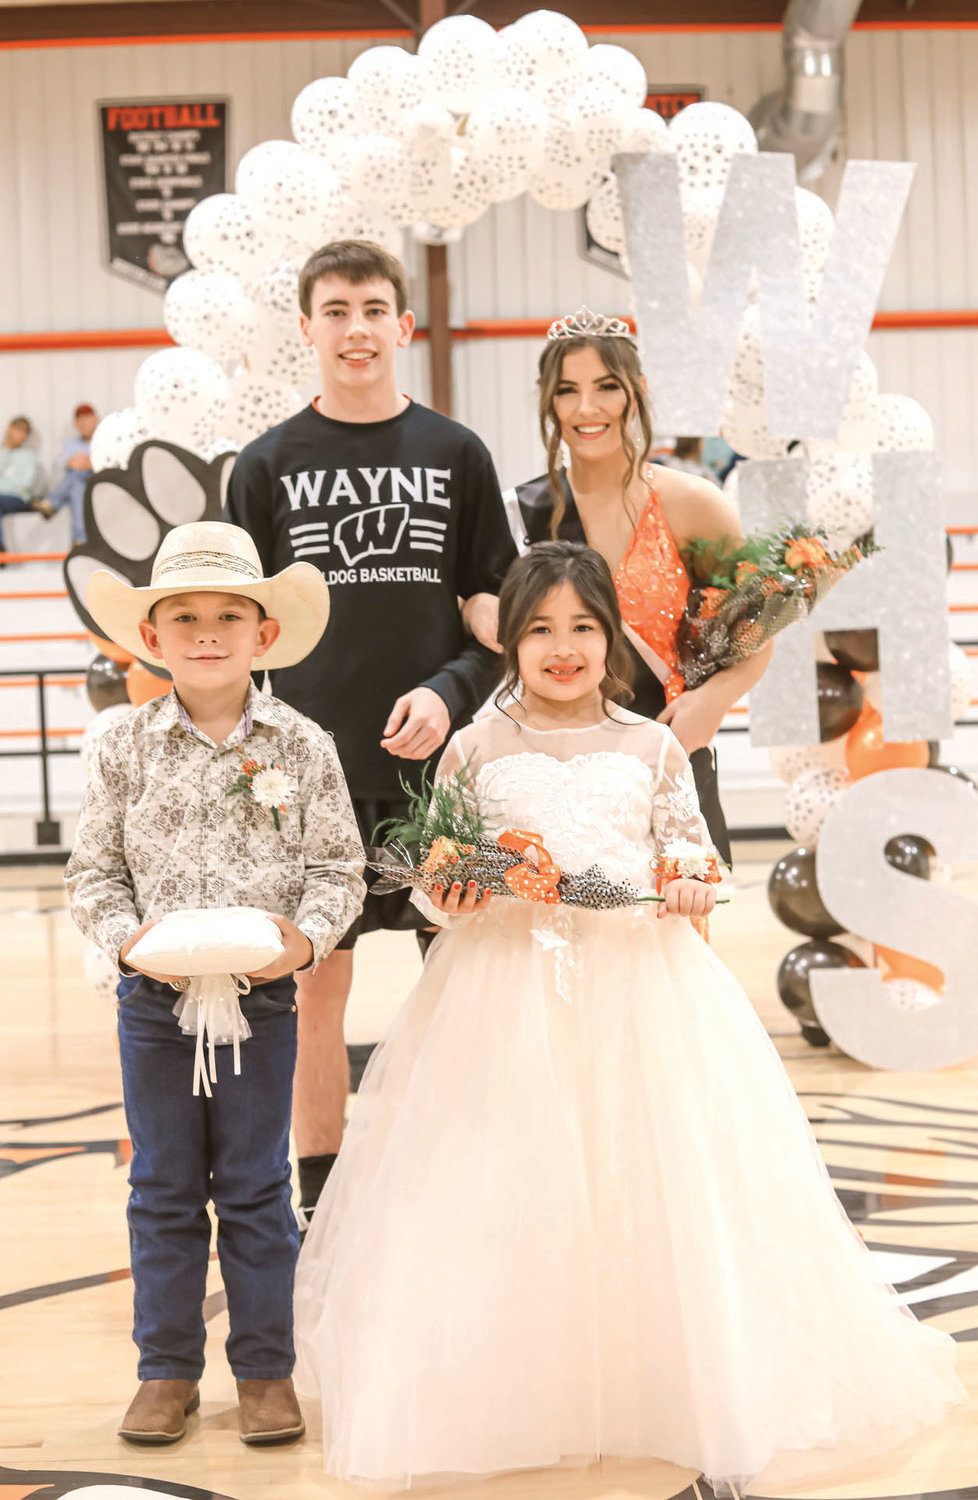 King Kaleb Madden and Queen Kaylee Madden were crowned Homecoming royalty last week at Wayne. They are pictured with crown bearer Laramie Sherwood and flowergirl Andrea Rojas.